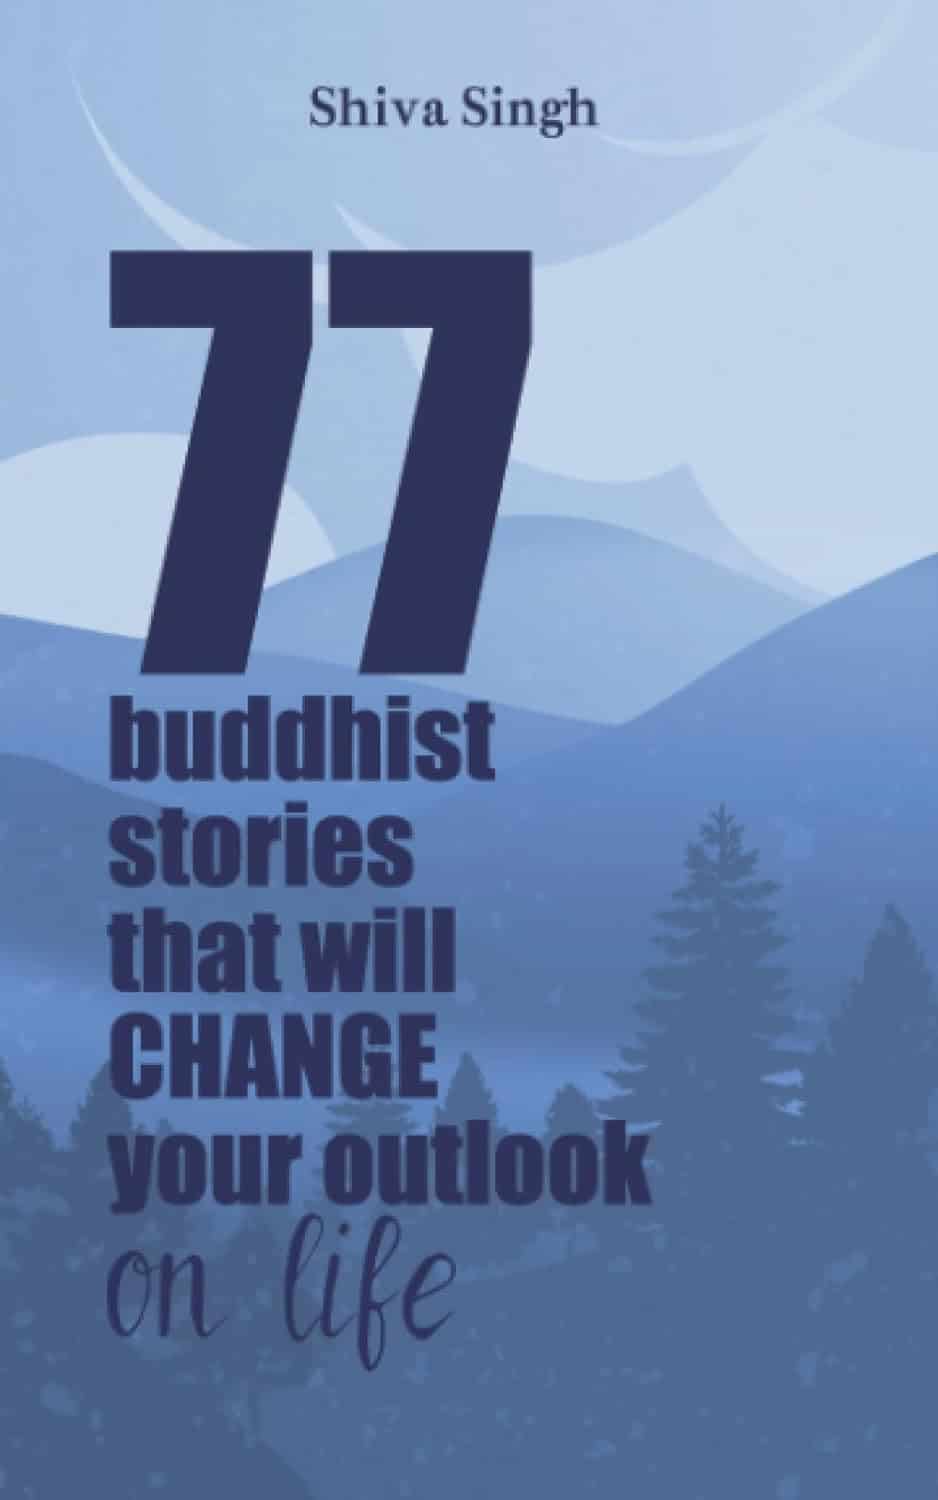 77 Buddhist Stories That Will Change Your Outlook on Life - Shiva Singh77 Buddhist Stories That Will Change Your Outlook on Life - Shiva Singh